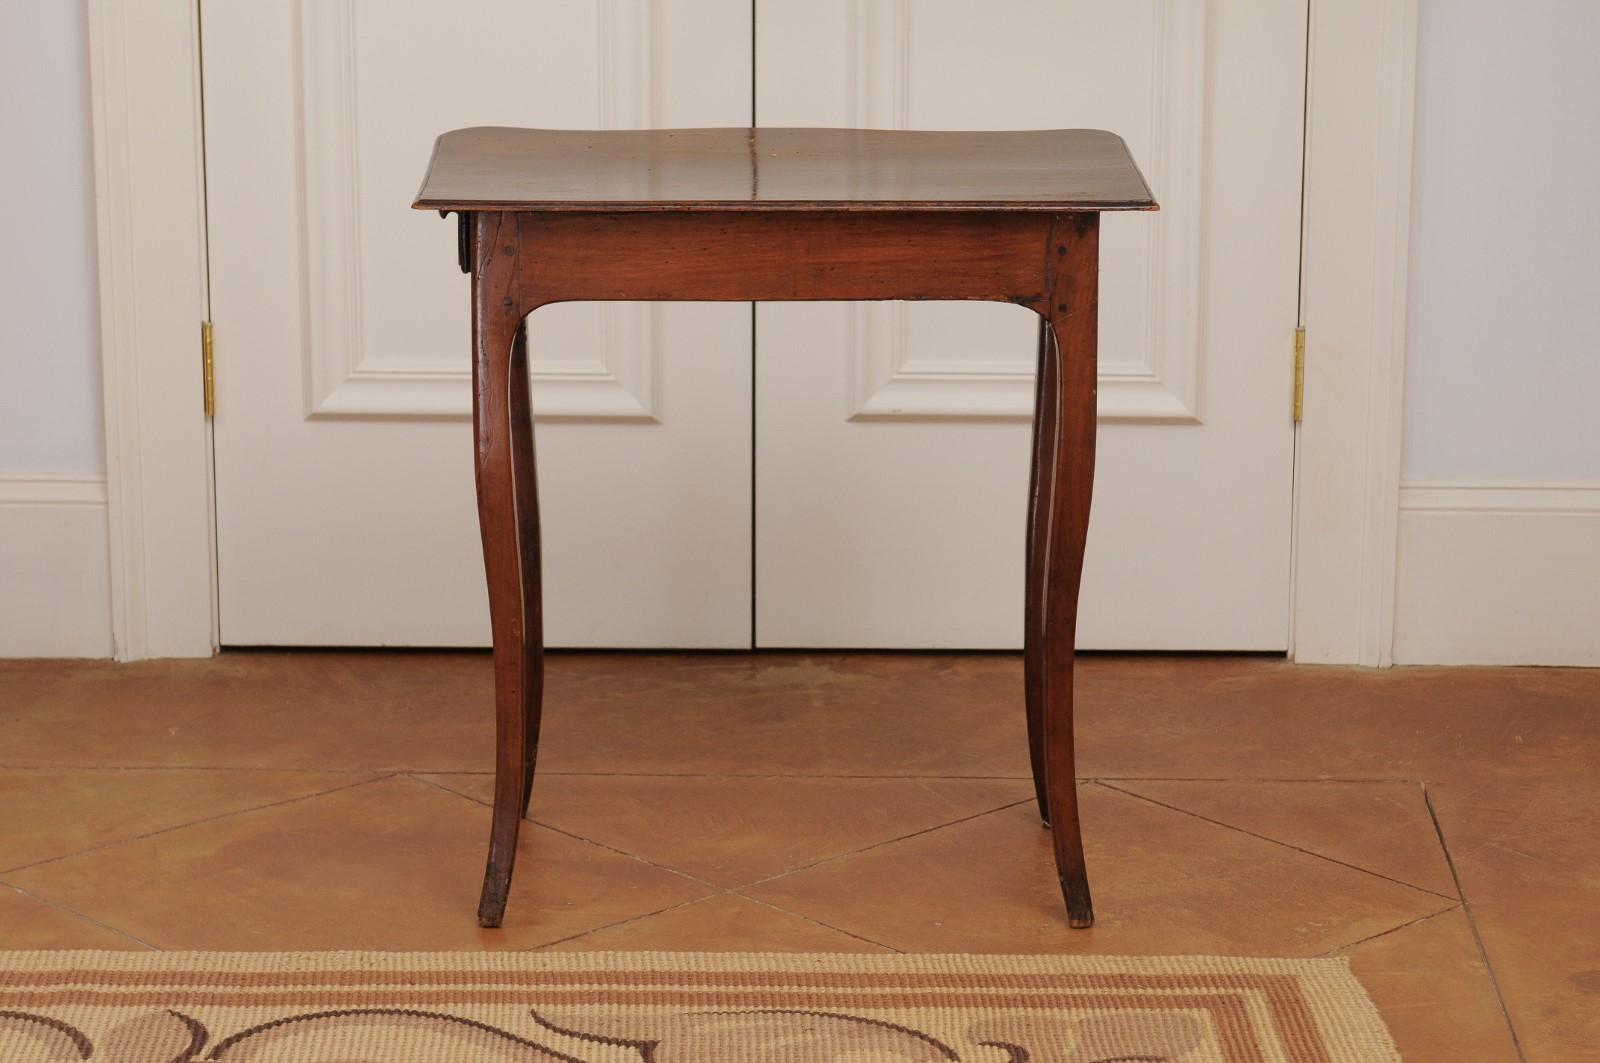 French 1790s Walnut Side Table with Side Drawer, Curving Legs and Carved Apron For Sale 4